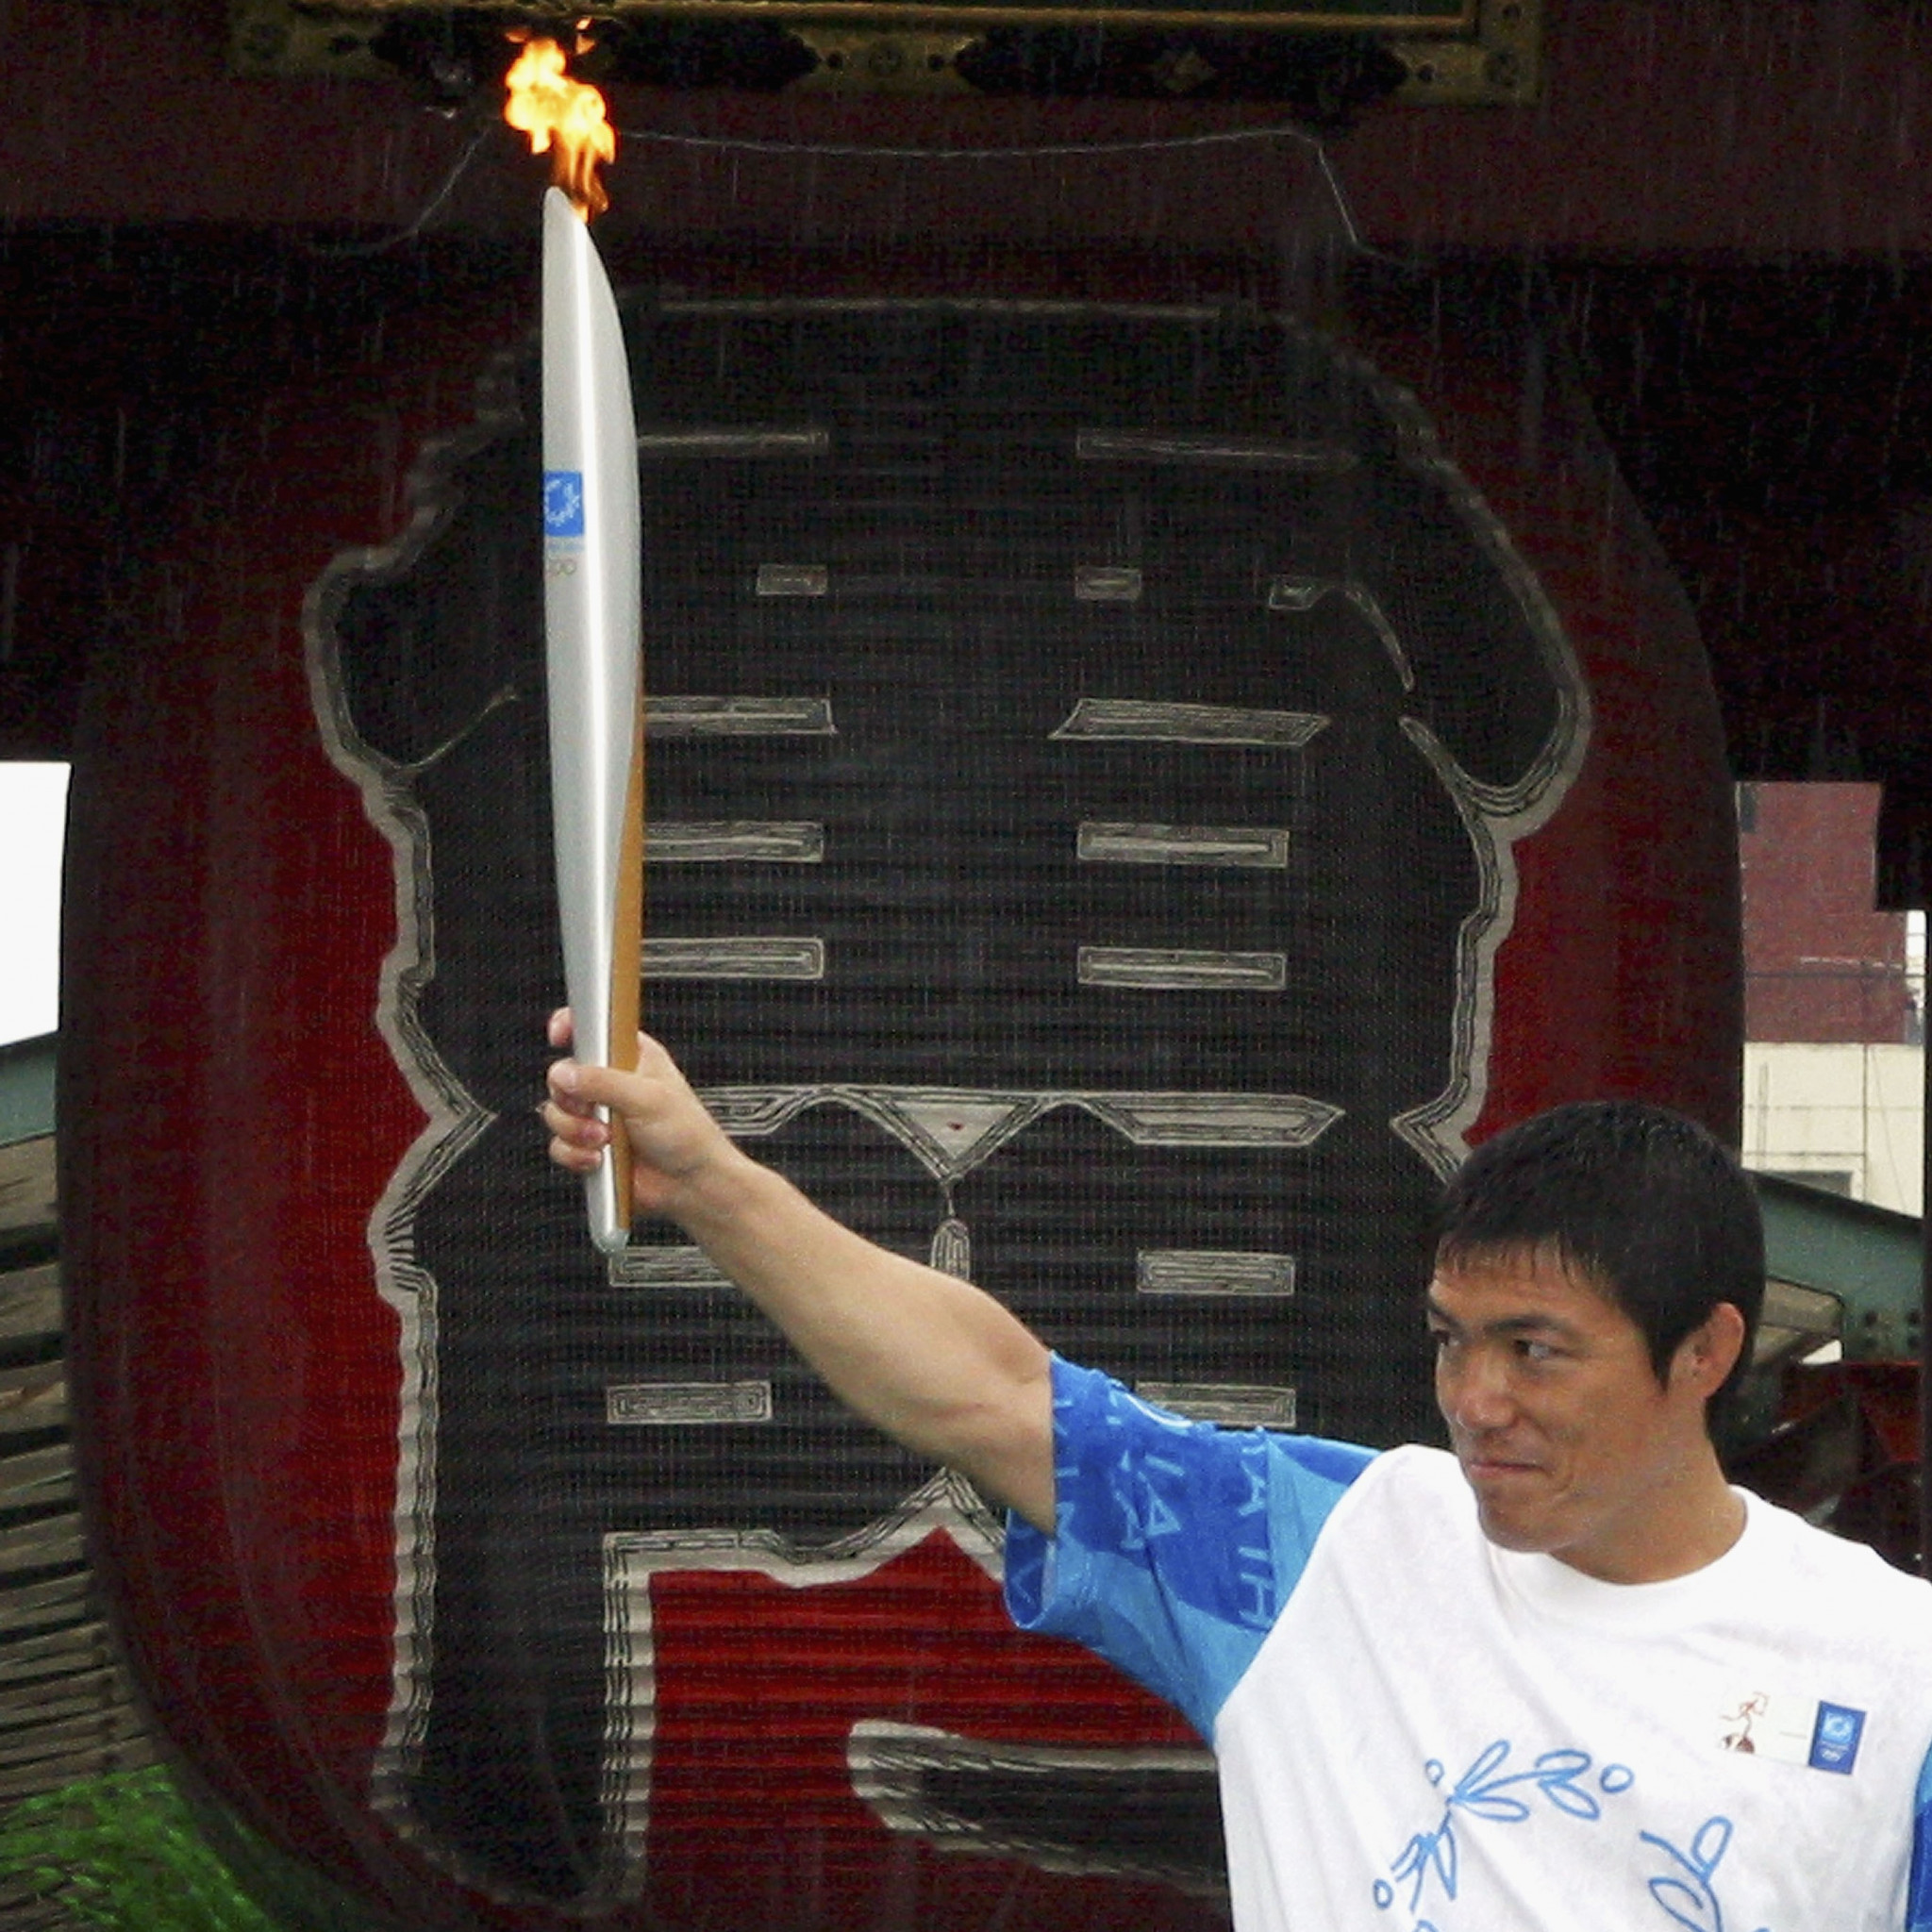 Toshihiko Koga, Japan’s 1992 Olympic gold judo medallist pictured with the Olympic torch ahead of the 2004 Athens Games, who died this week aged 53 having had cancer, was honoured by a minute's silence during the draw for the IJF Tbilisi Grand Slam that starts tomorrow ©Getty Images